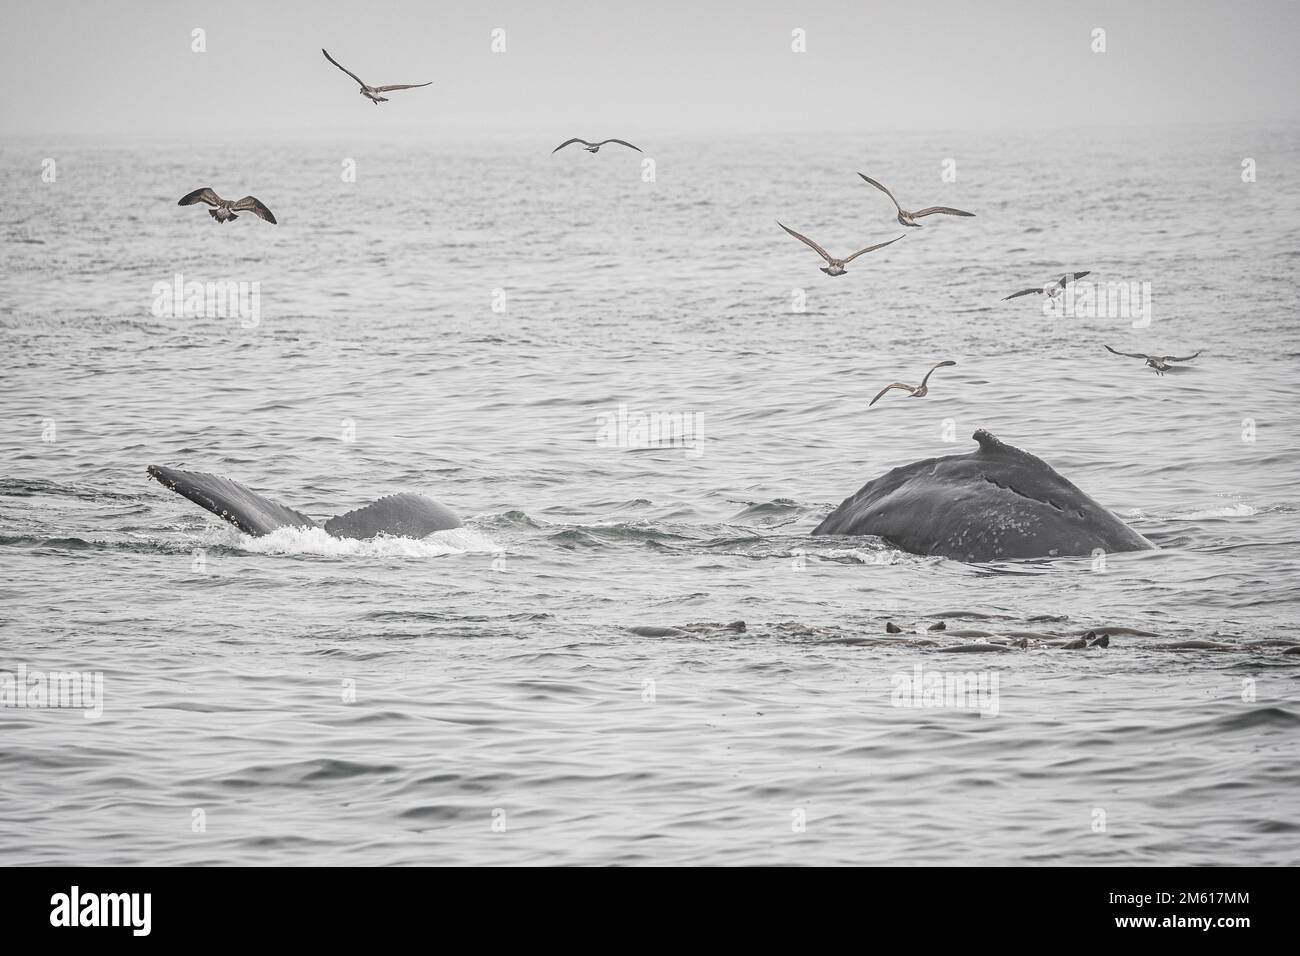 Humpback whale watching in Monterey Bay, California Stock Photo